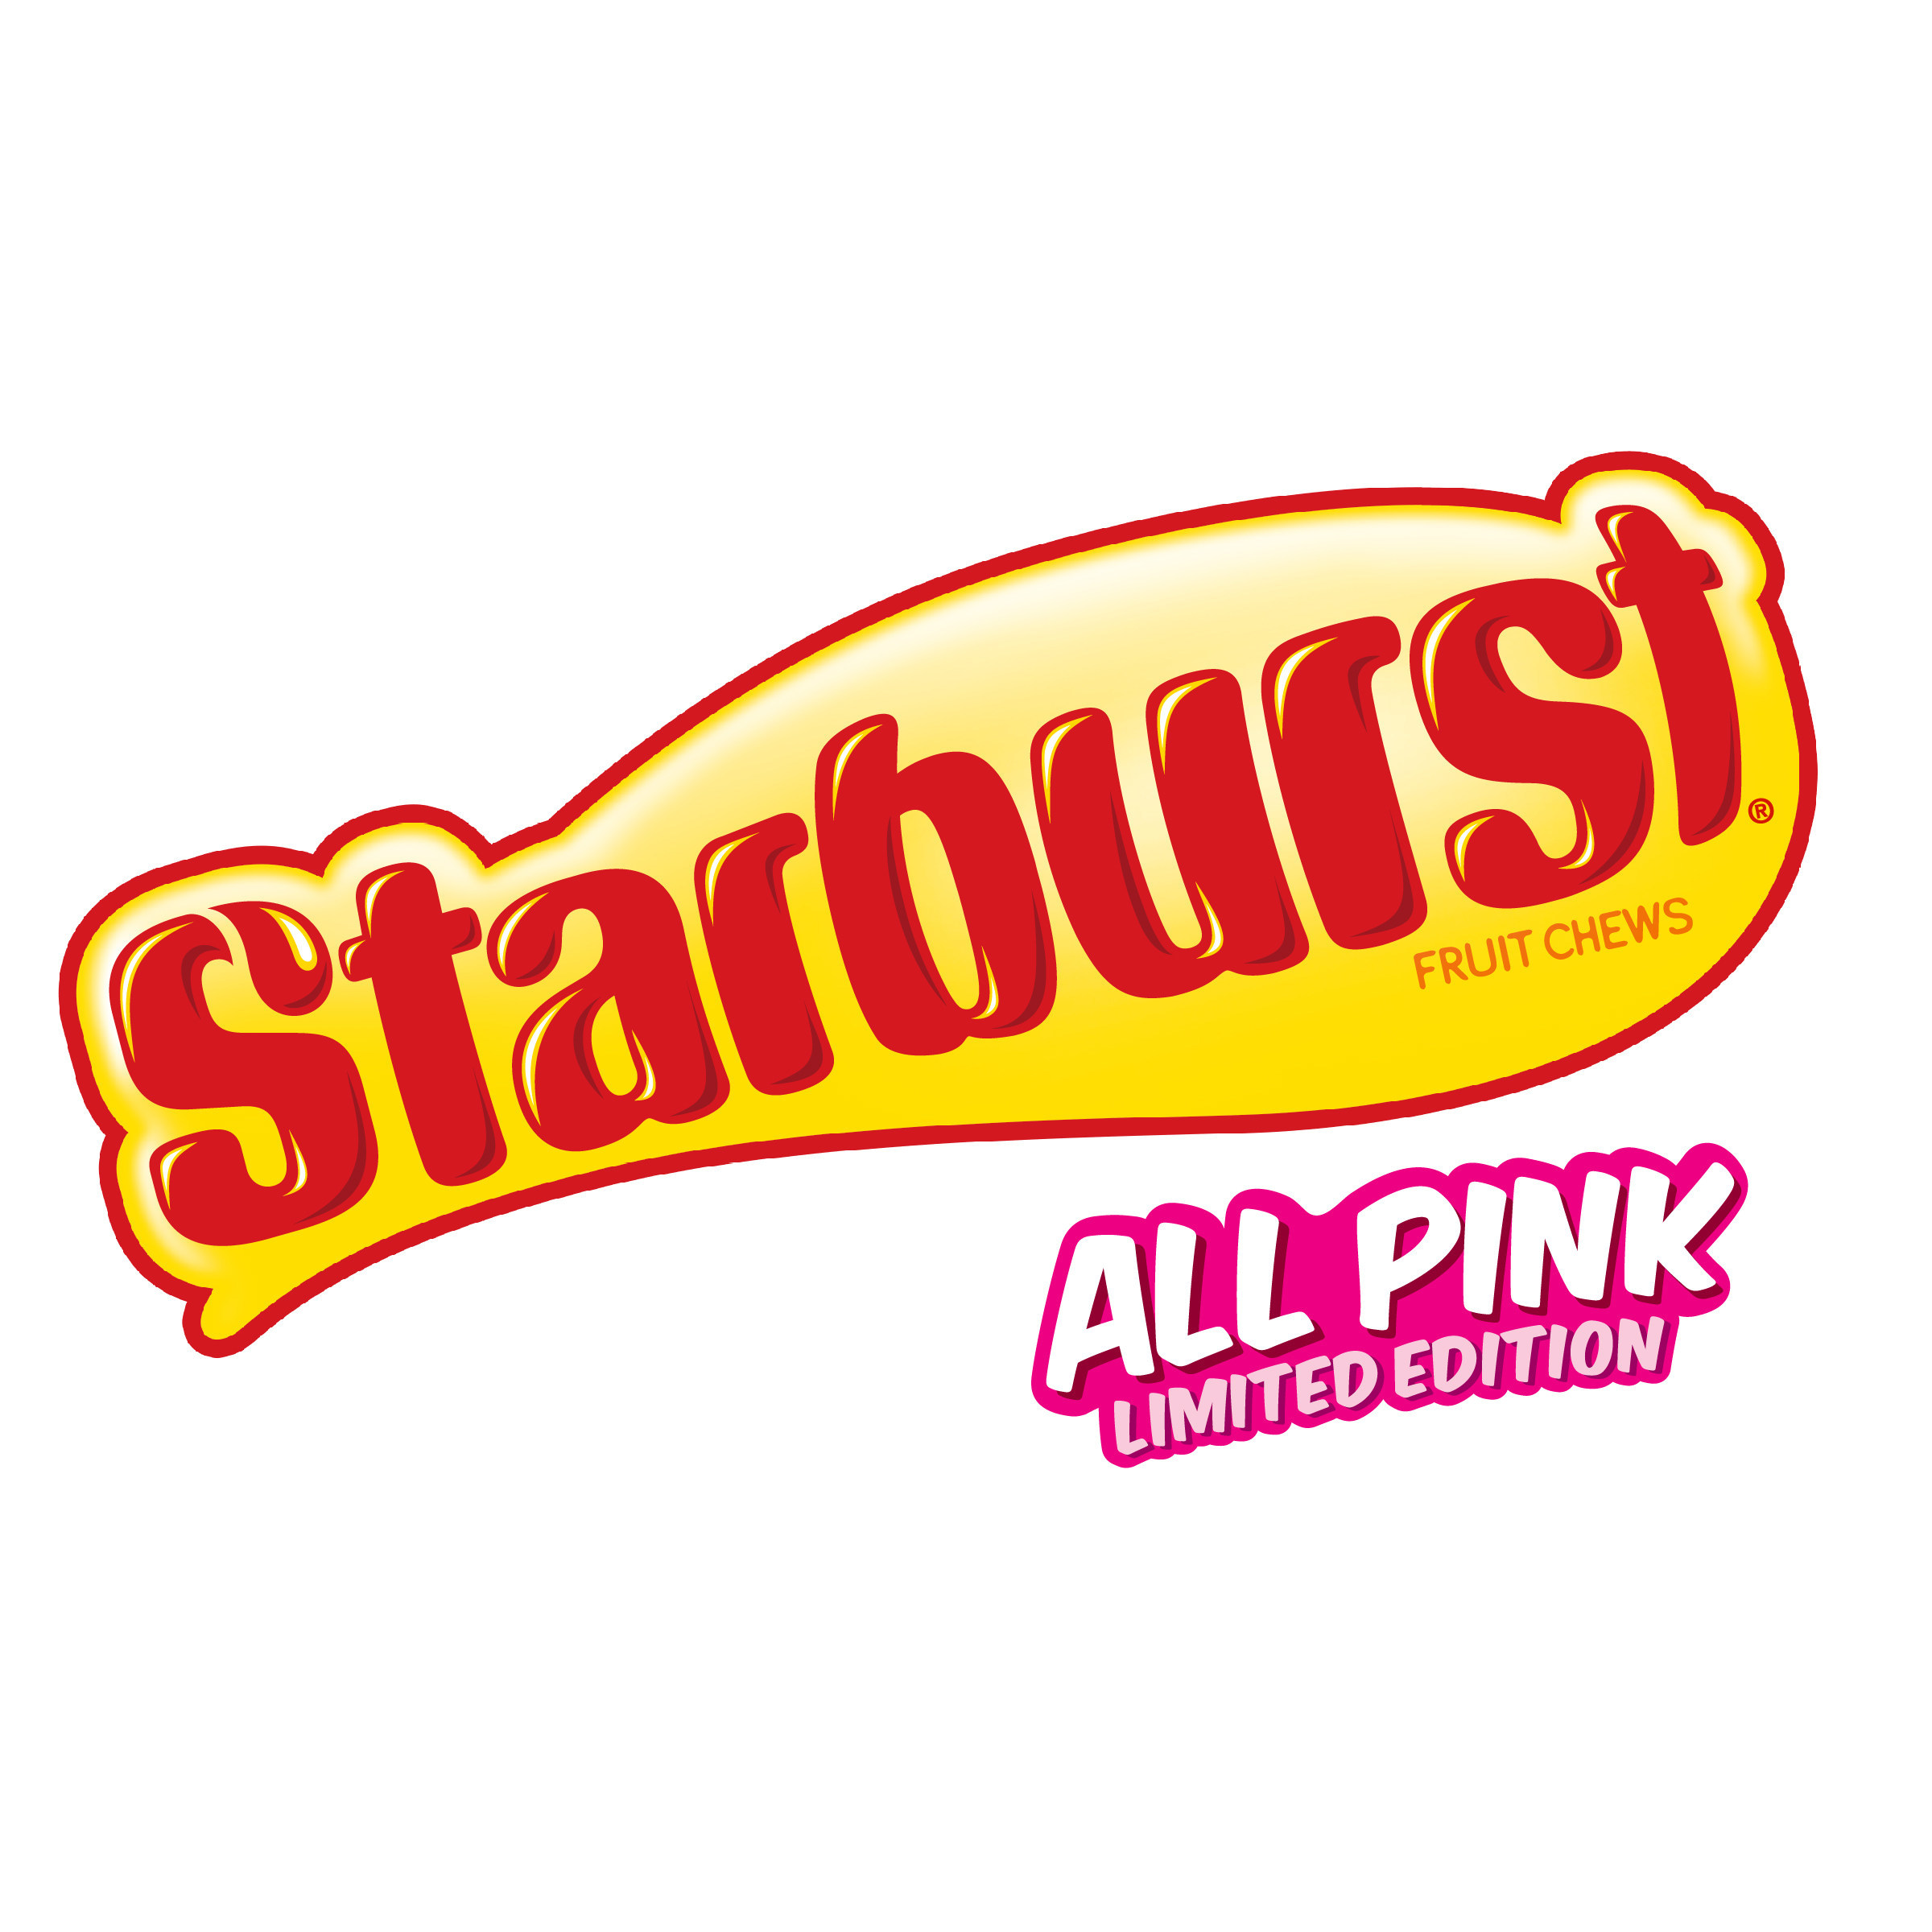 STARBURST Celebrates Return of Limited-Edition All Pink with New Merch Line